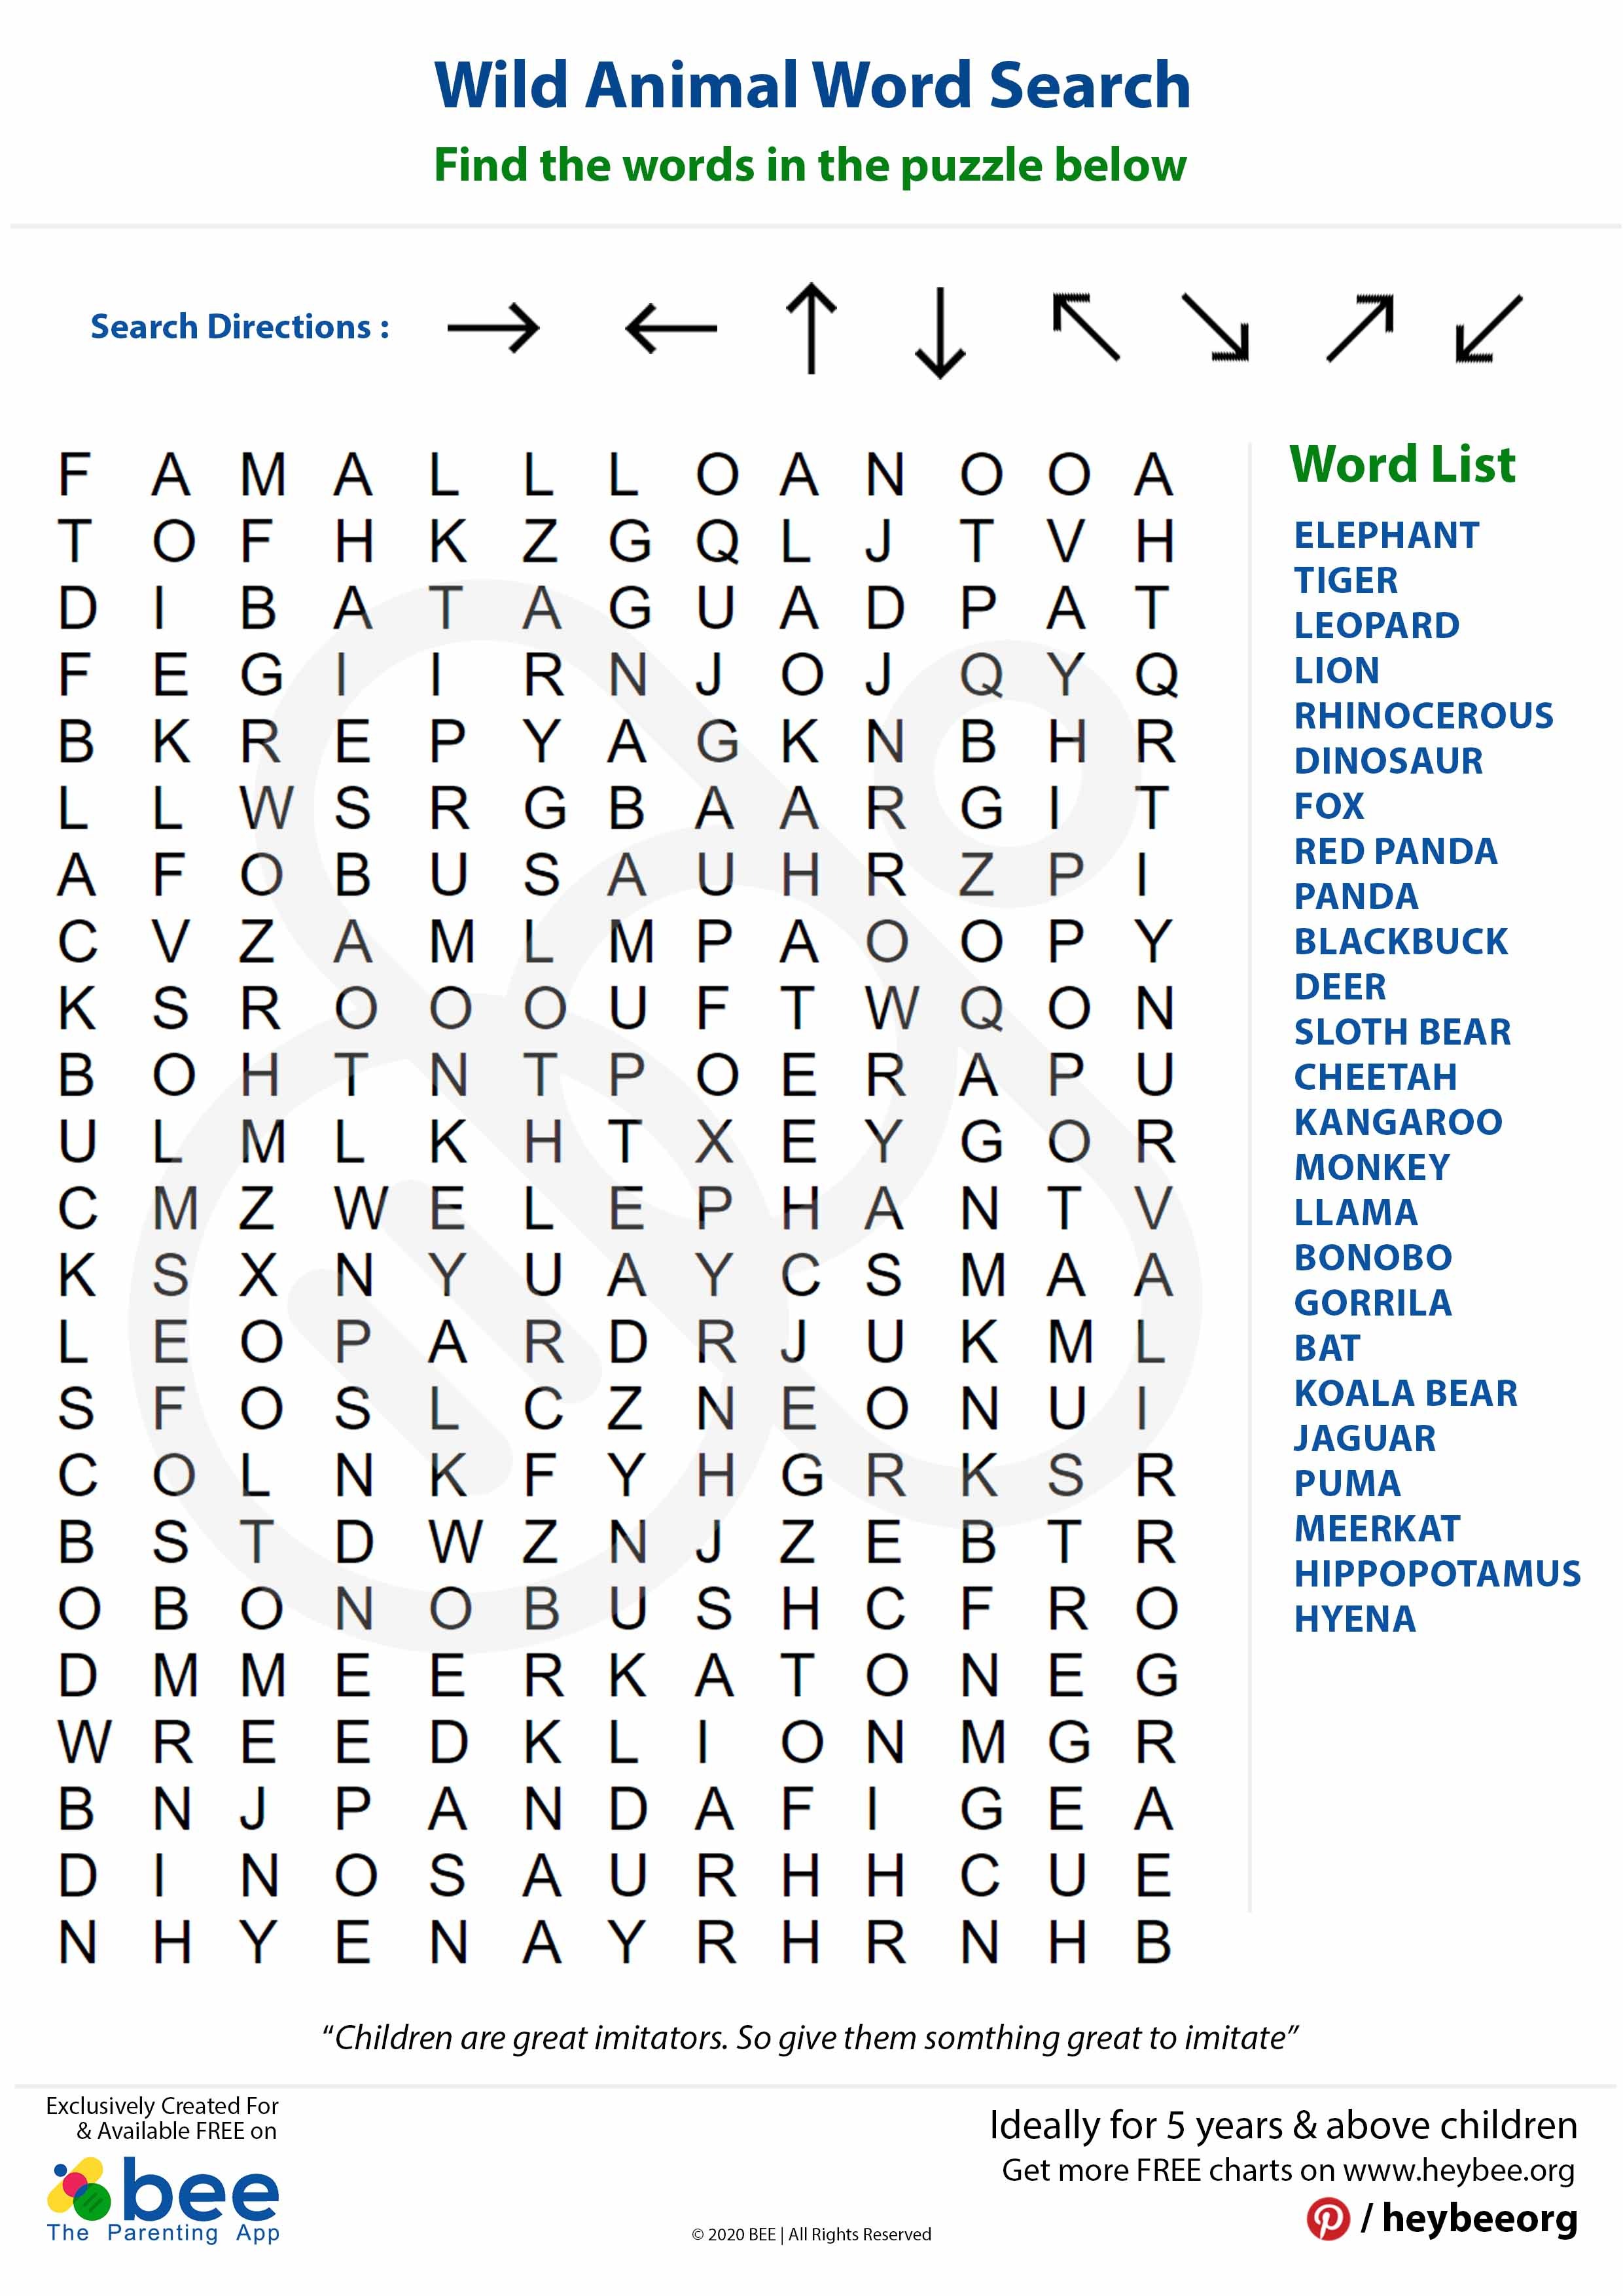 Wild animal search word puzzle